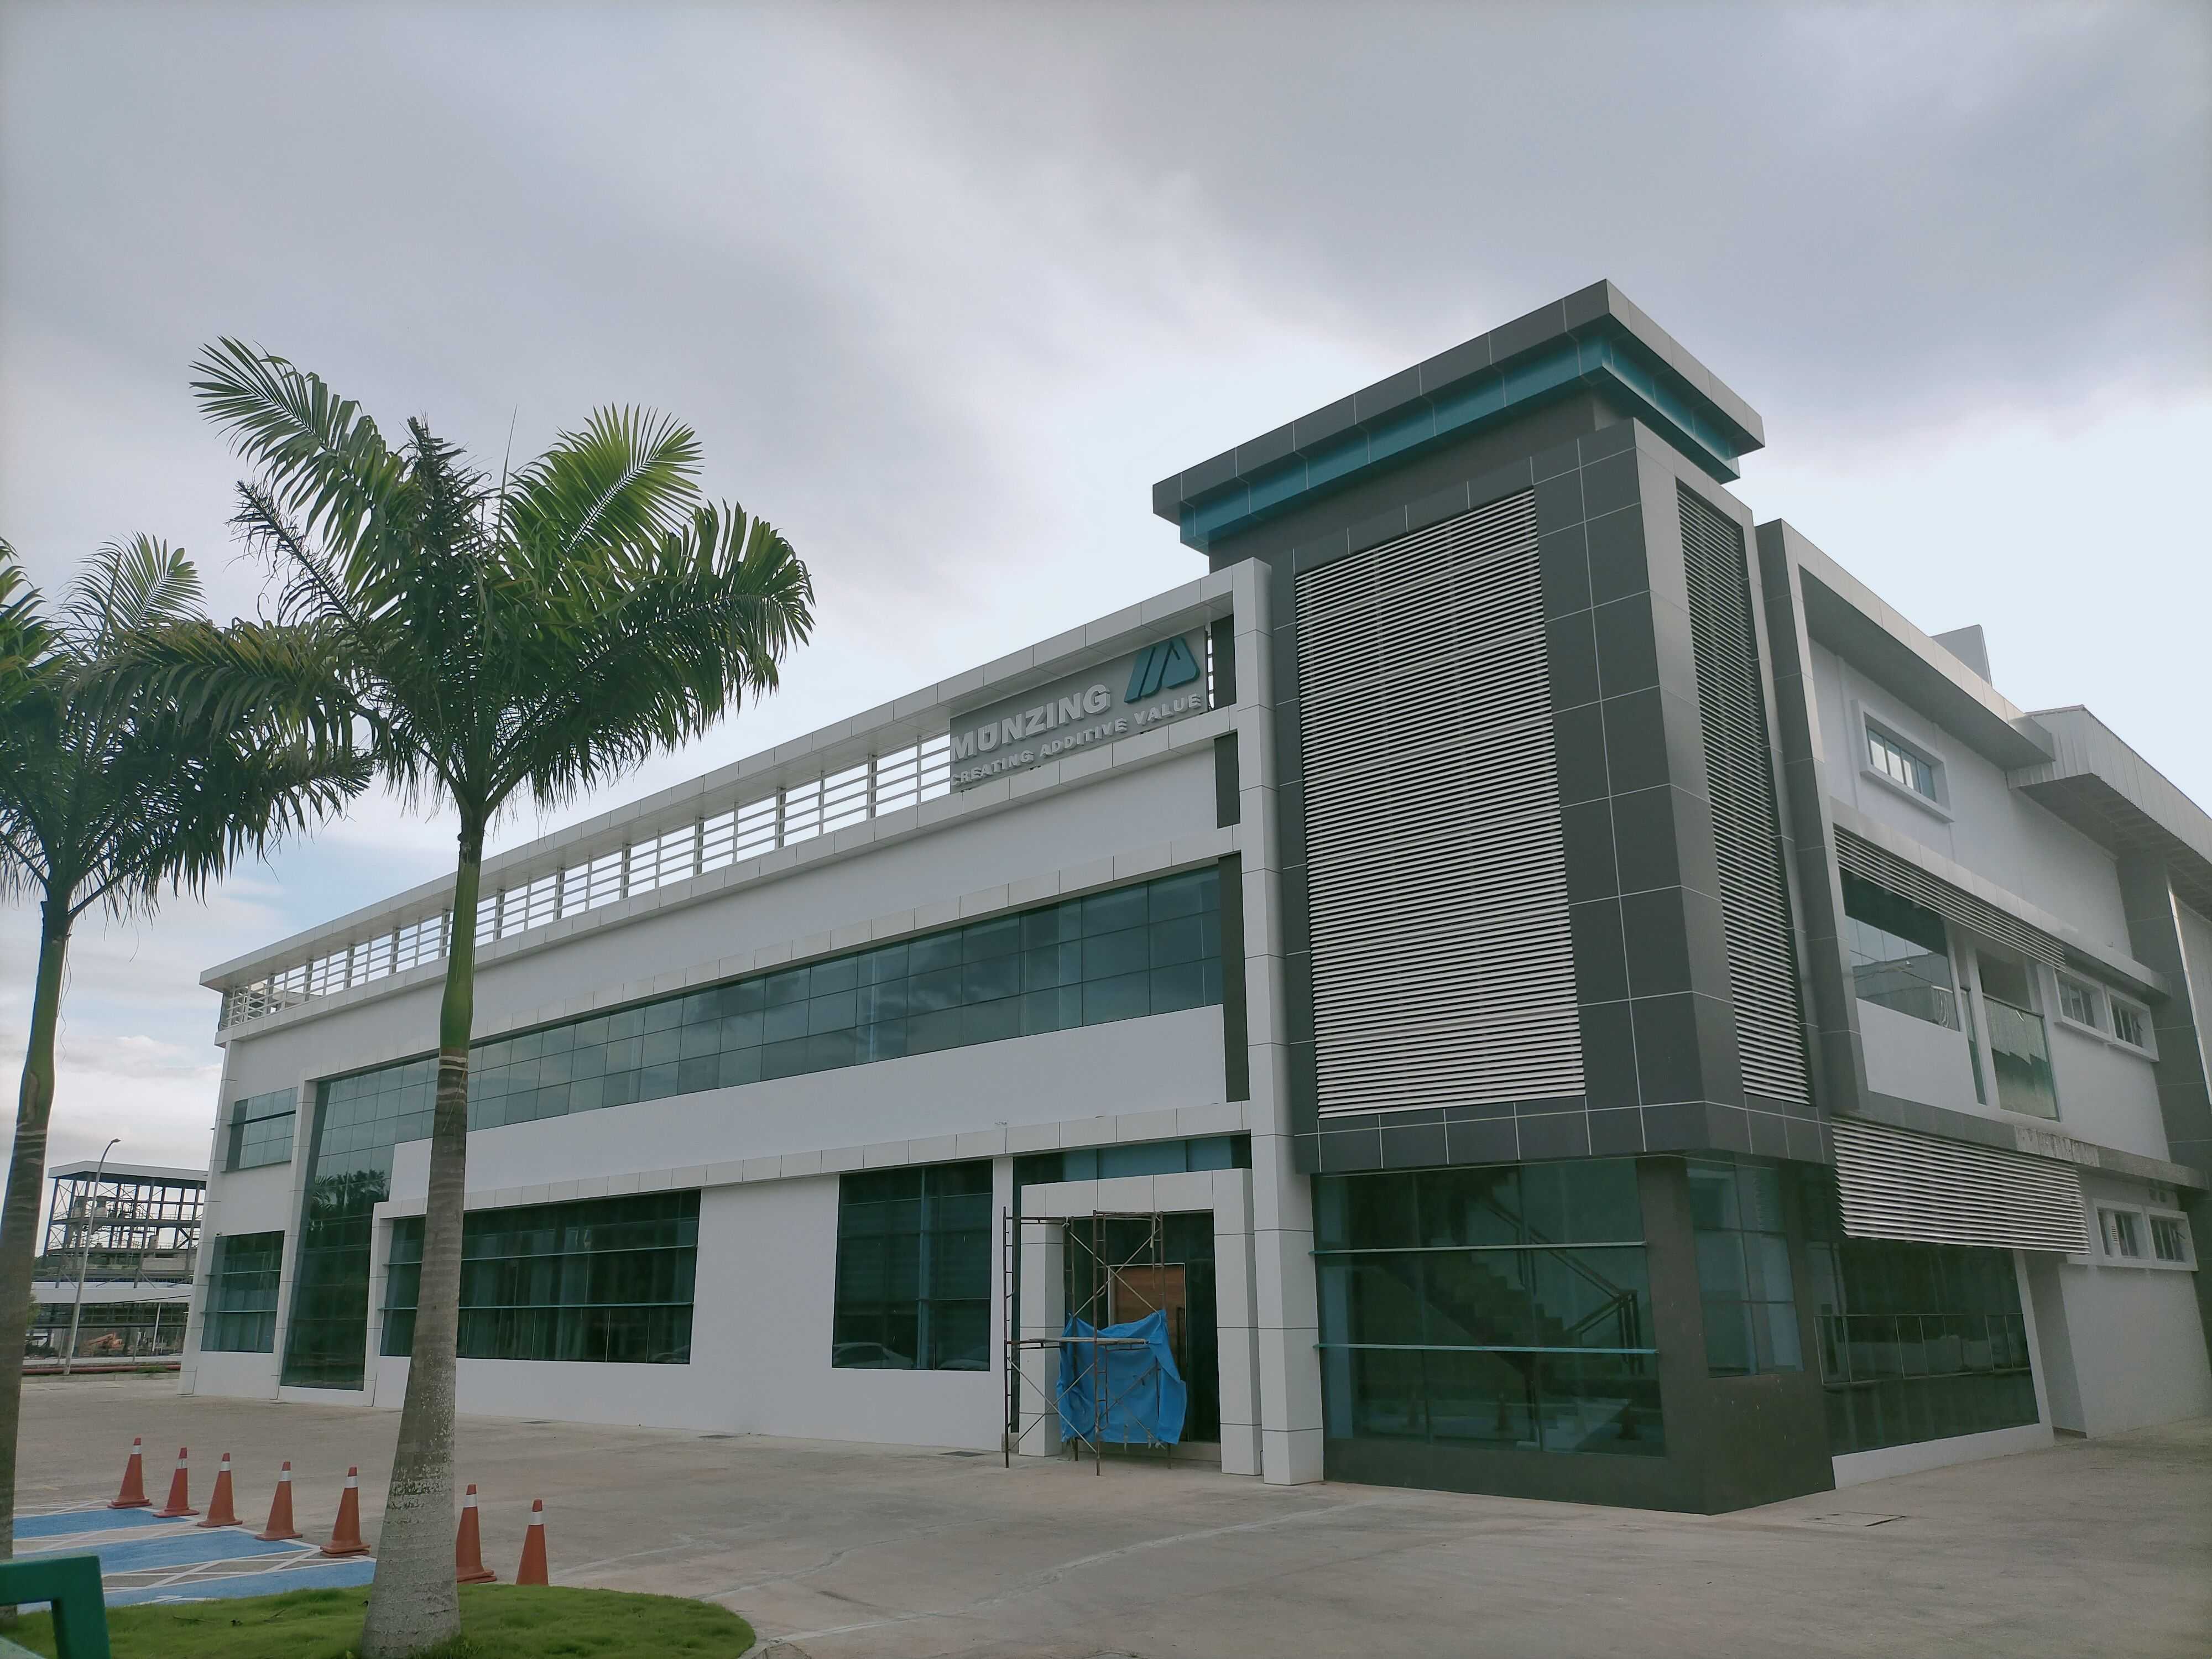 <p class="ql-align-justify">On March 22, 2023, after a three-year project and construction period, the production plant of MÜNZING Malaysia SDN BHD for wax and polymer emulsions in Bukit Selambau Industrial Park, was ceremonially inaugurated.</p><p class="ql-align-justify"><br></p><p class="ql-align-justify">Already in October 2022, the first product batch was produced in the new plant. Currently, approximately 20 customers are being sampled with additional batches. The goal is to ramp up production to 100% by Q3 2023 and produce a portfolio of up to 100 products at the site in the future. The completed plant is equipped with state-of-the-art technology and capable to produce water-based wax emulsions and other specialty additives such as liquid defoamers on an area of more than 18,000 m<sup>2</sup>. The products are mainly used in the construction industry and for architectural paints and make a decisive contribution to improved processing and durability of plasters, exterior and interior paints used in construction. </p><p class="ql-align-justify"><br></p><p class="ql-align-justify">In addition to a complete networking of production, logistics and infrastructure via process control systems, great importance was attached to the most energy-saving design possible during the planning of the plant. This includes an in-house combined heat and power plant, which generates environmentally friendly electricity and heat, and a sophisticated system for recovering energy in all heating and cooling processes. 70% of the energy used flows back into the production plant through the recovery process.</p><p><br></p>